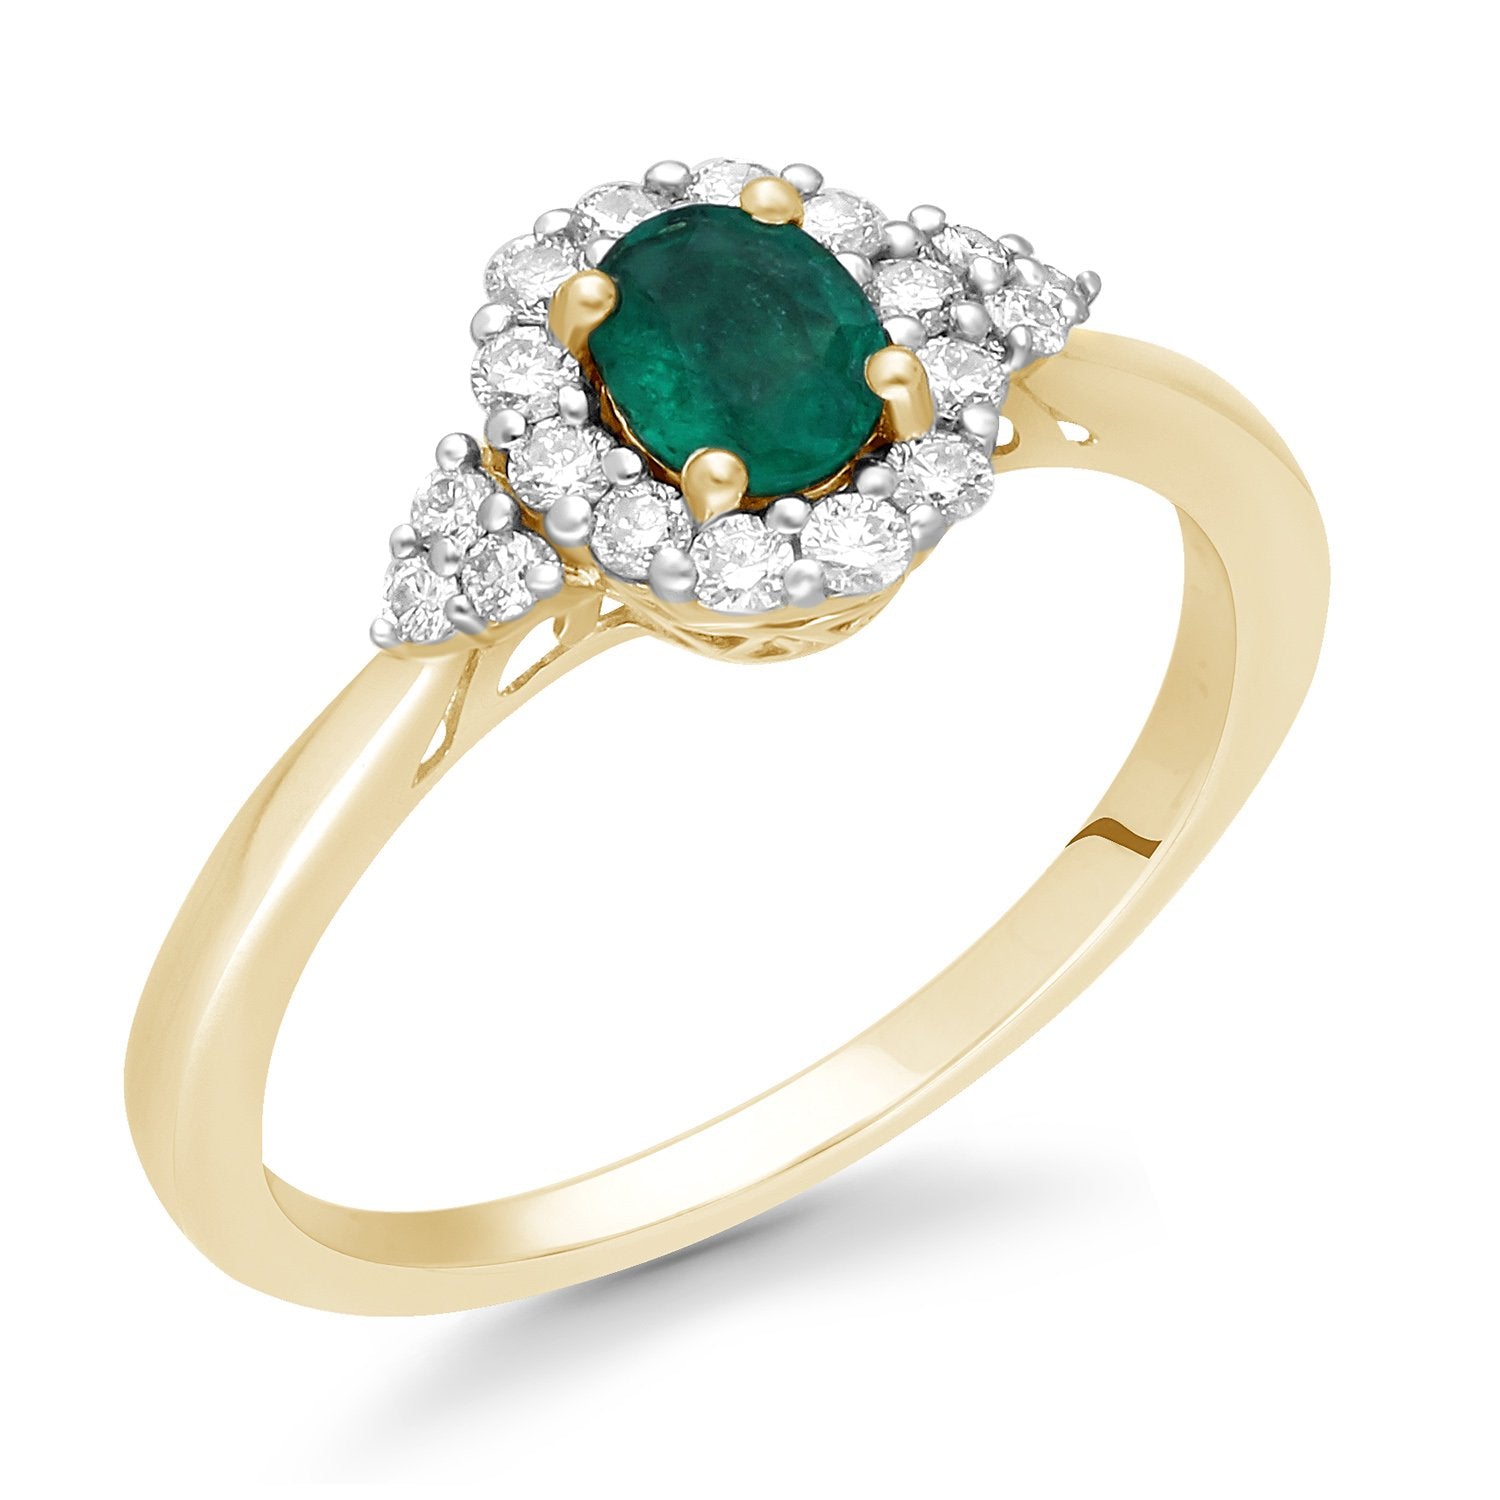 Platinum Designer Twisting Eternity Channel Set Four Prong Diamond  Engagement Ring with a 1 Carat Emerald Heirloom Quality Center | Amazon.com